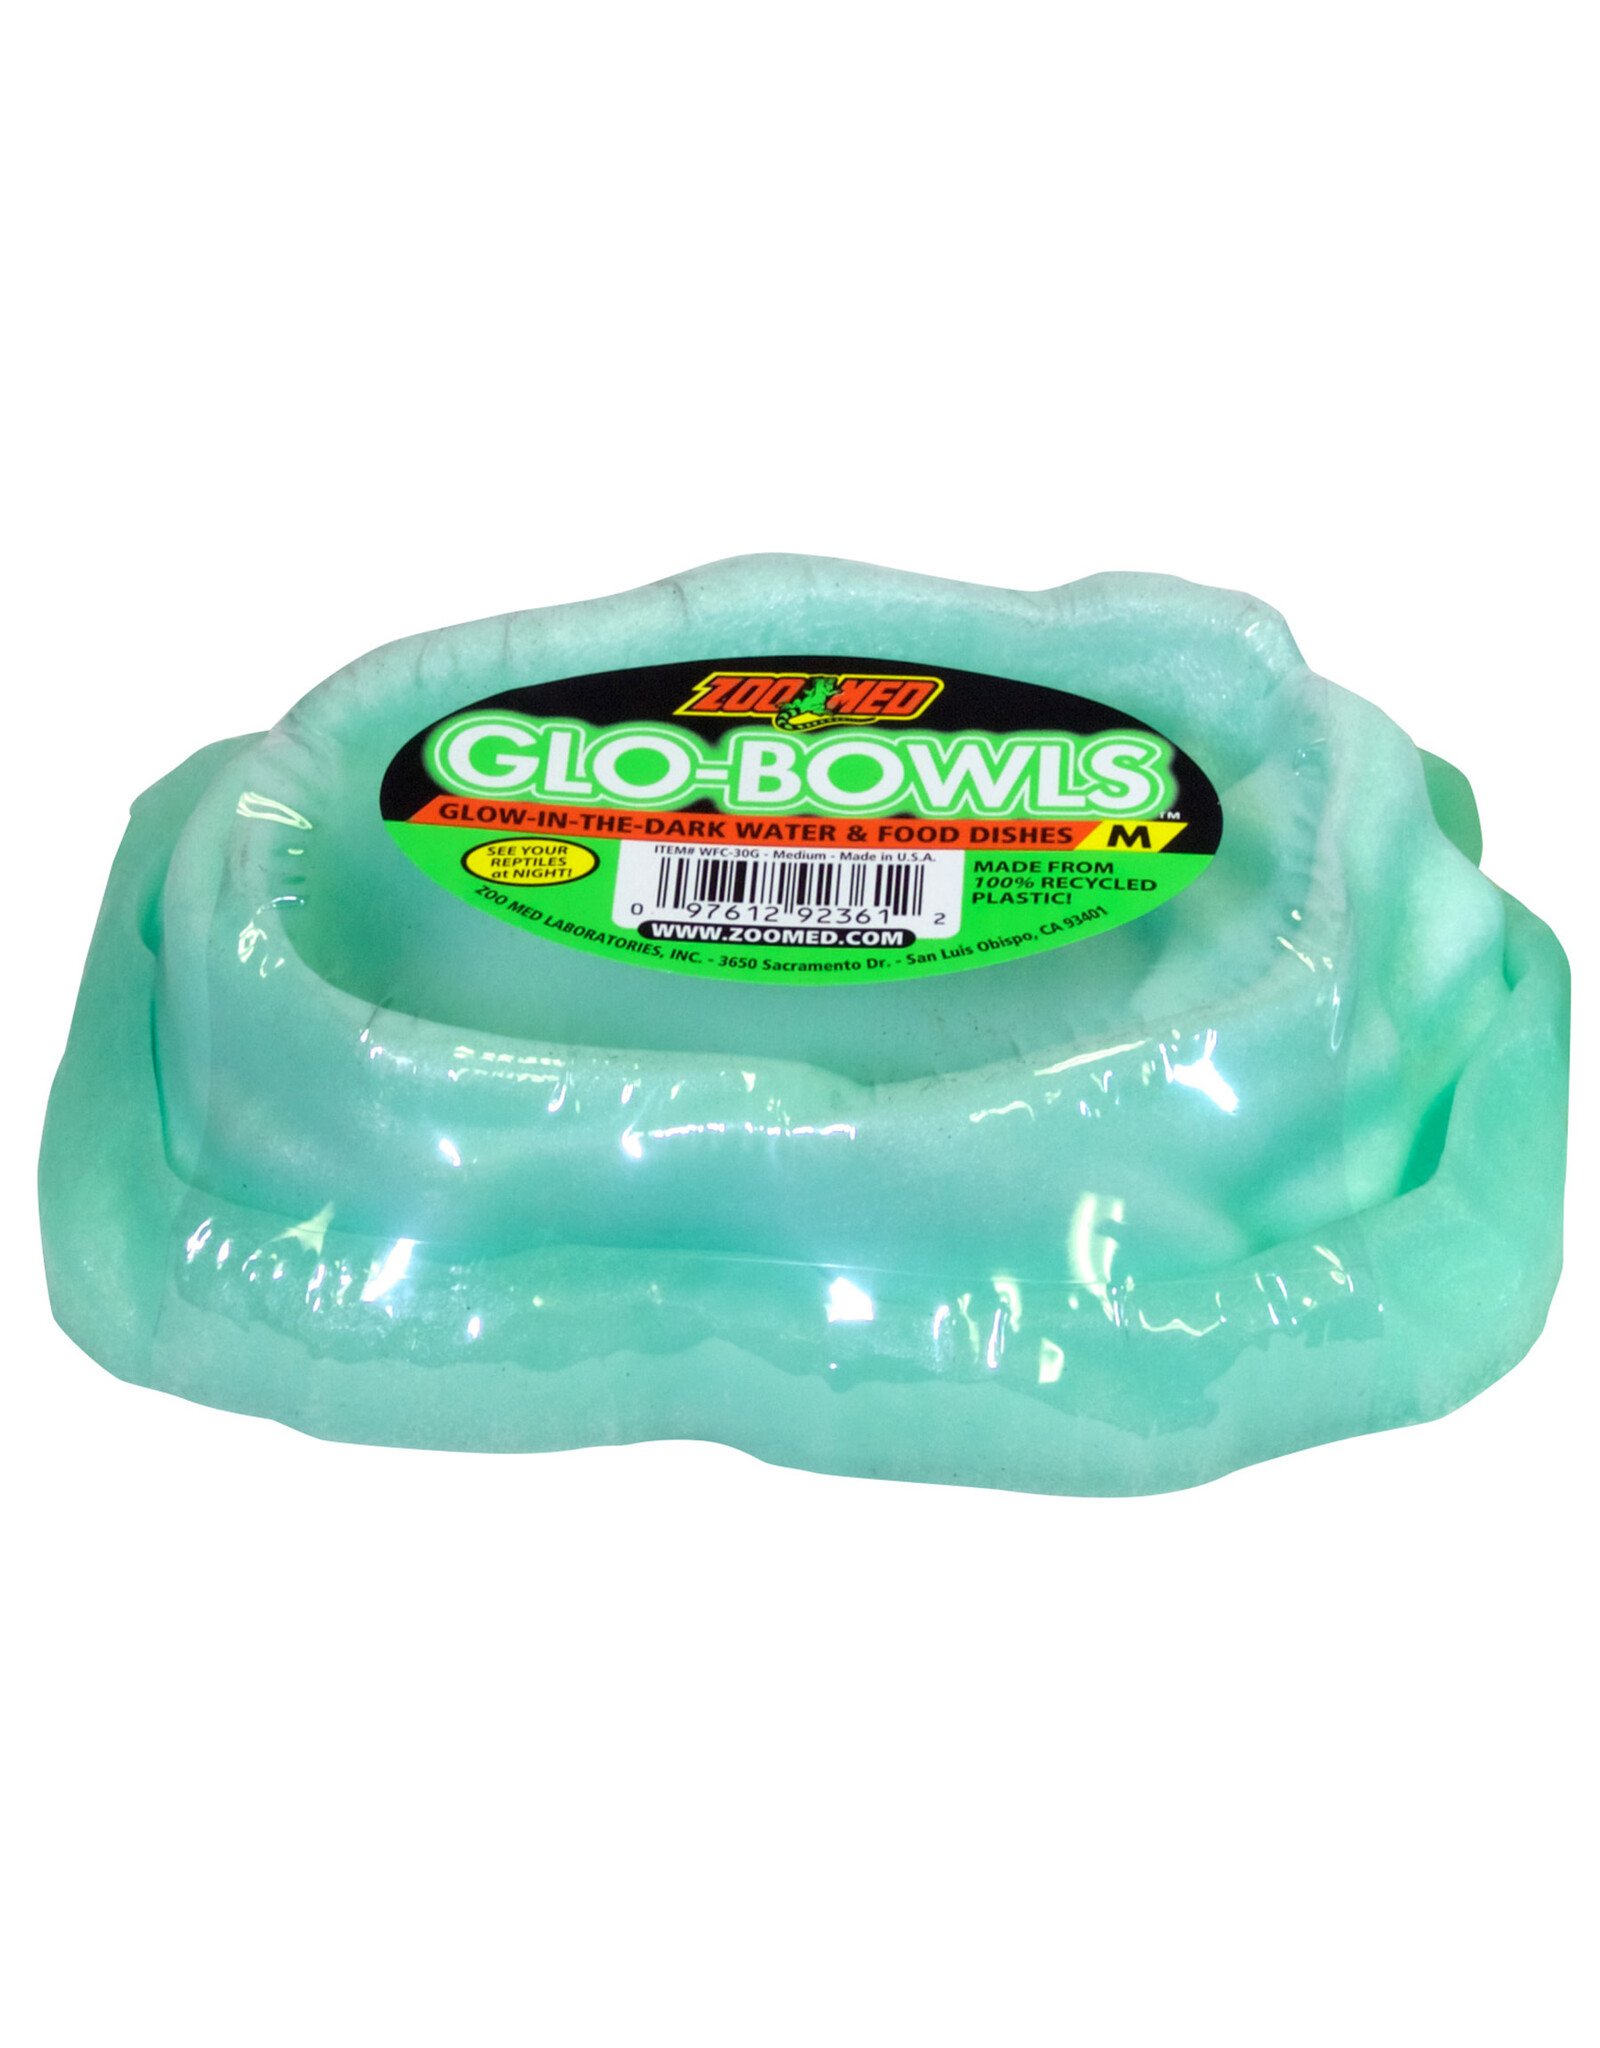 Zoo Med Zoo Med Glow Combo Repti Rock Food/Water Dish M